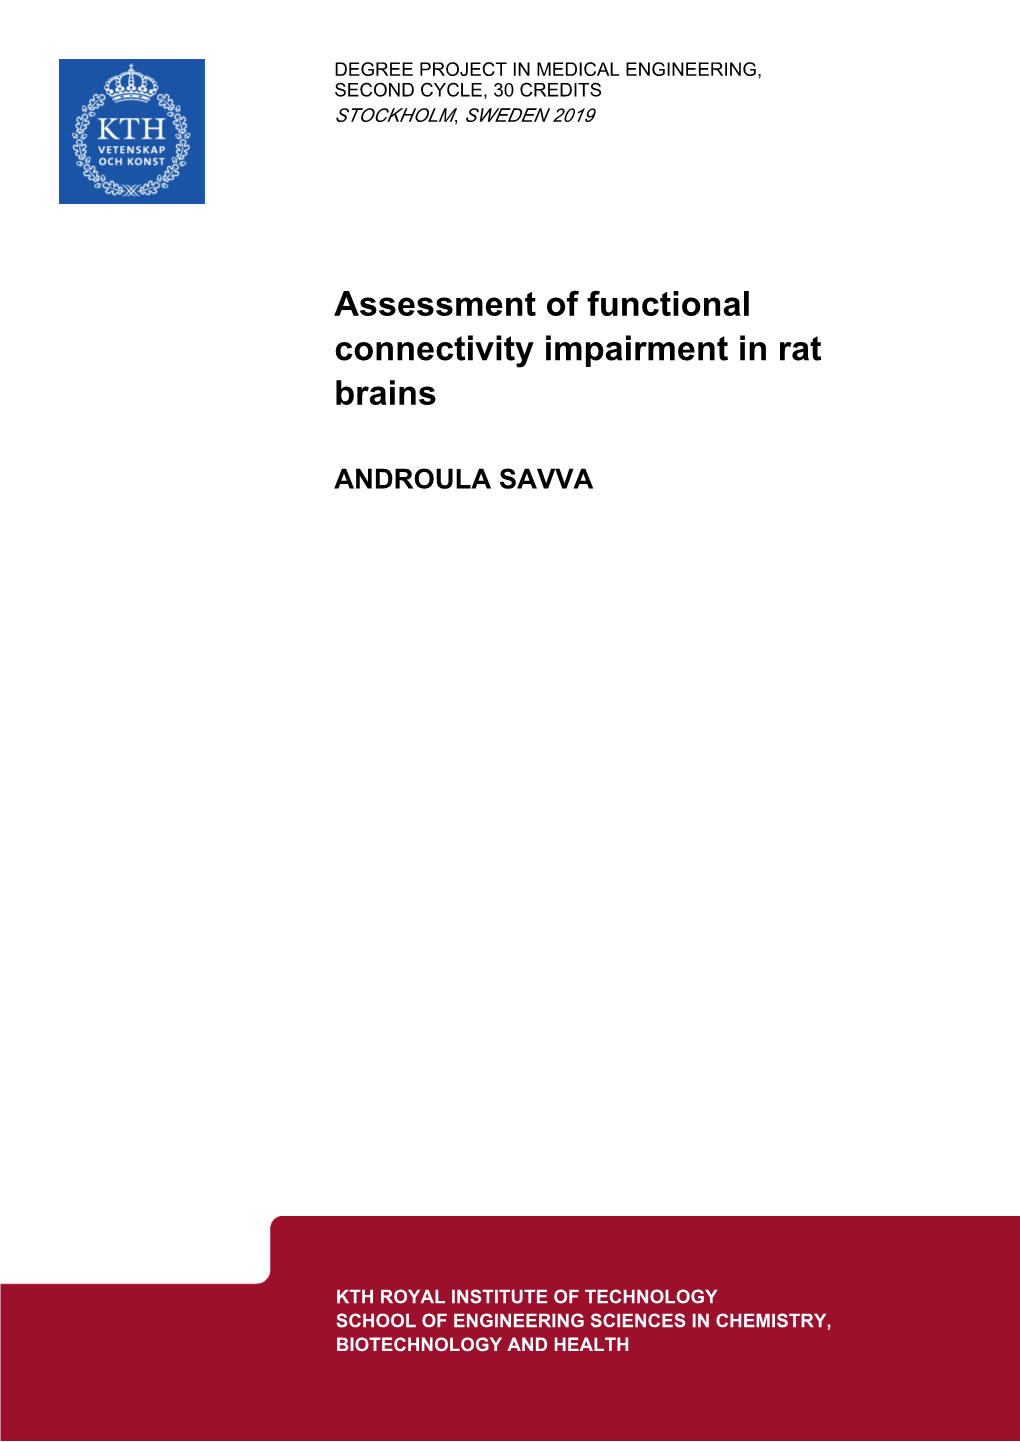 Assessment of Functional Connectivity Impairment in Rat Brains